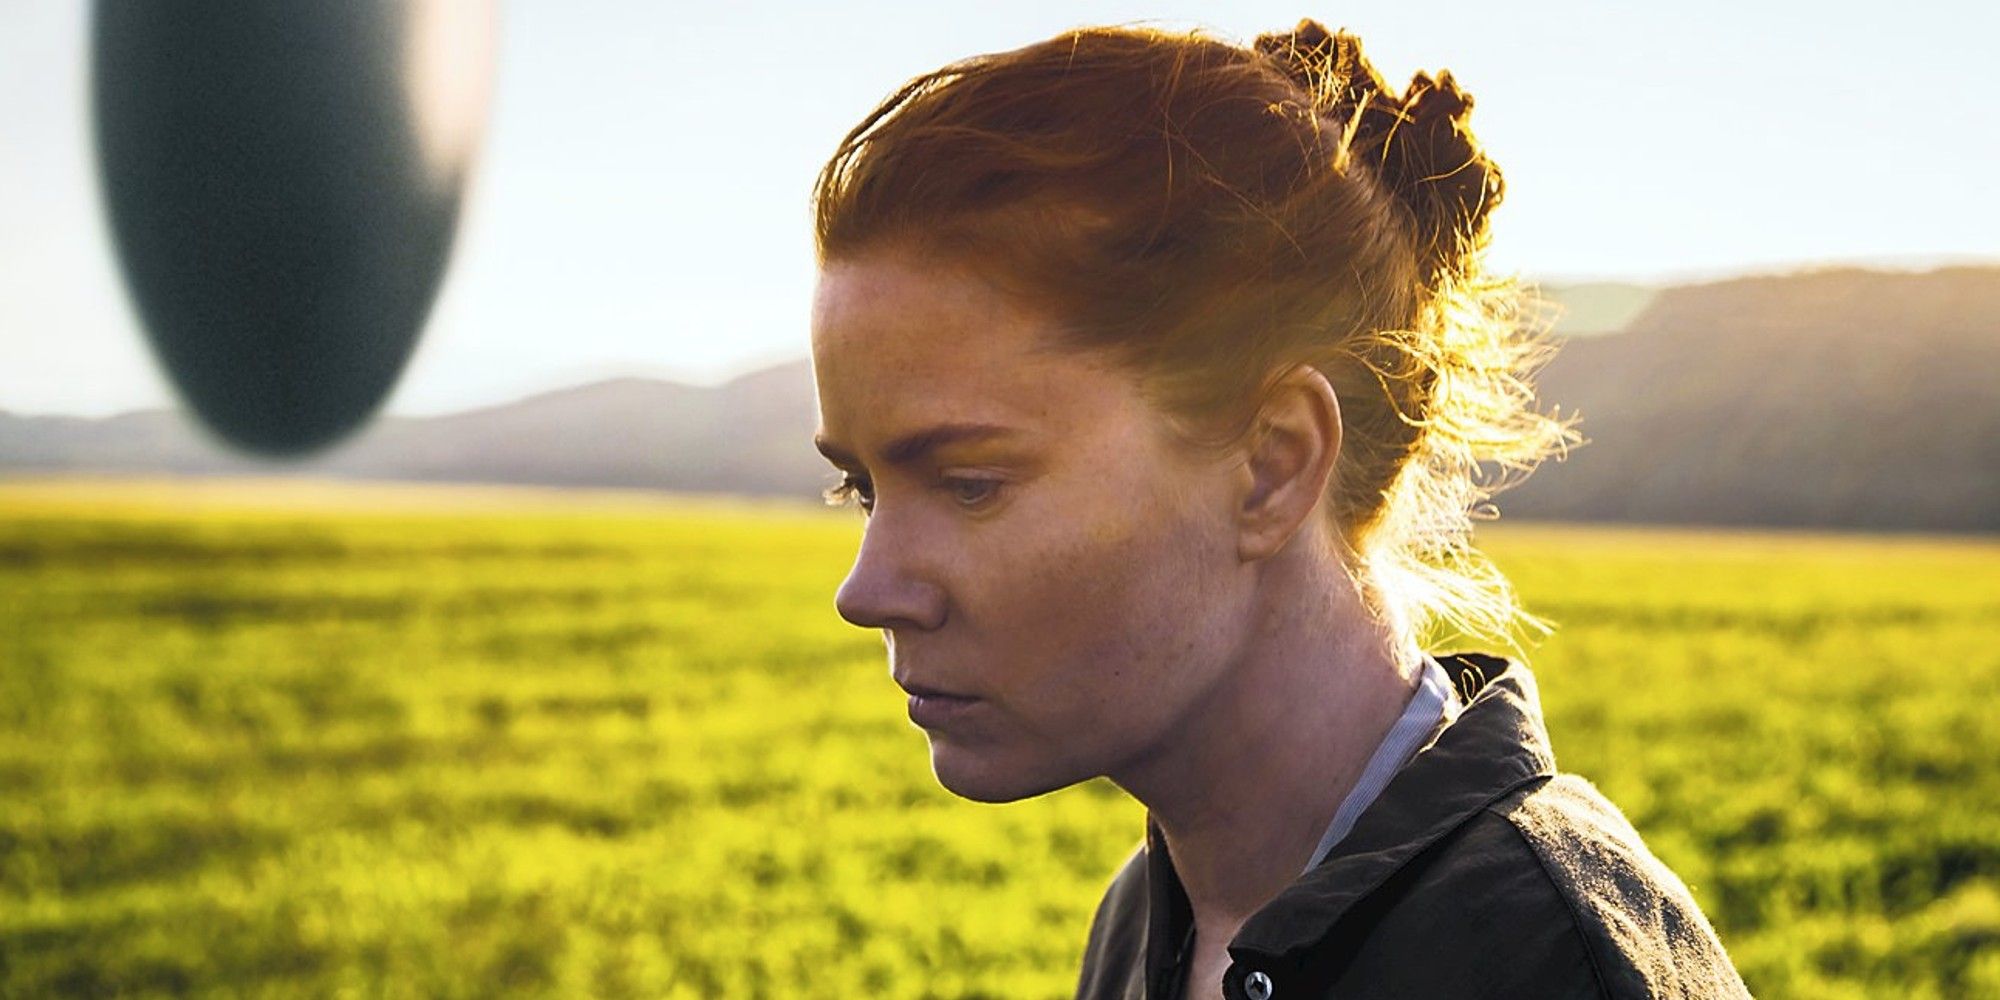 Louise Banks stands on the field looking pensive in the movie Arrival.